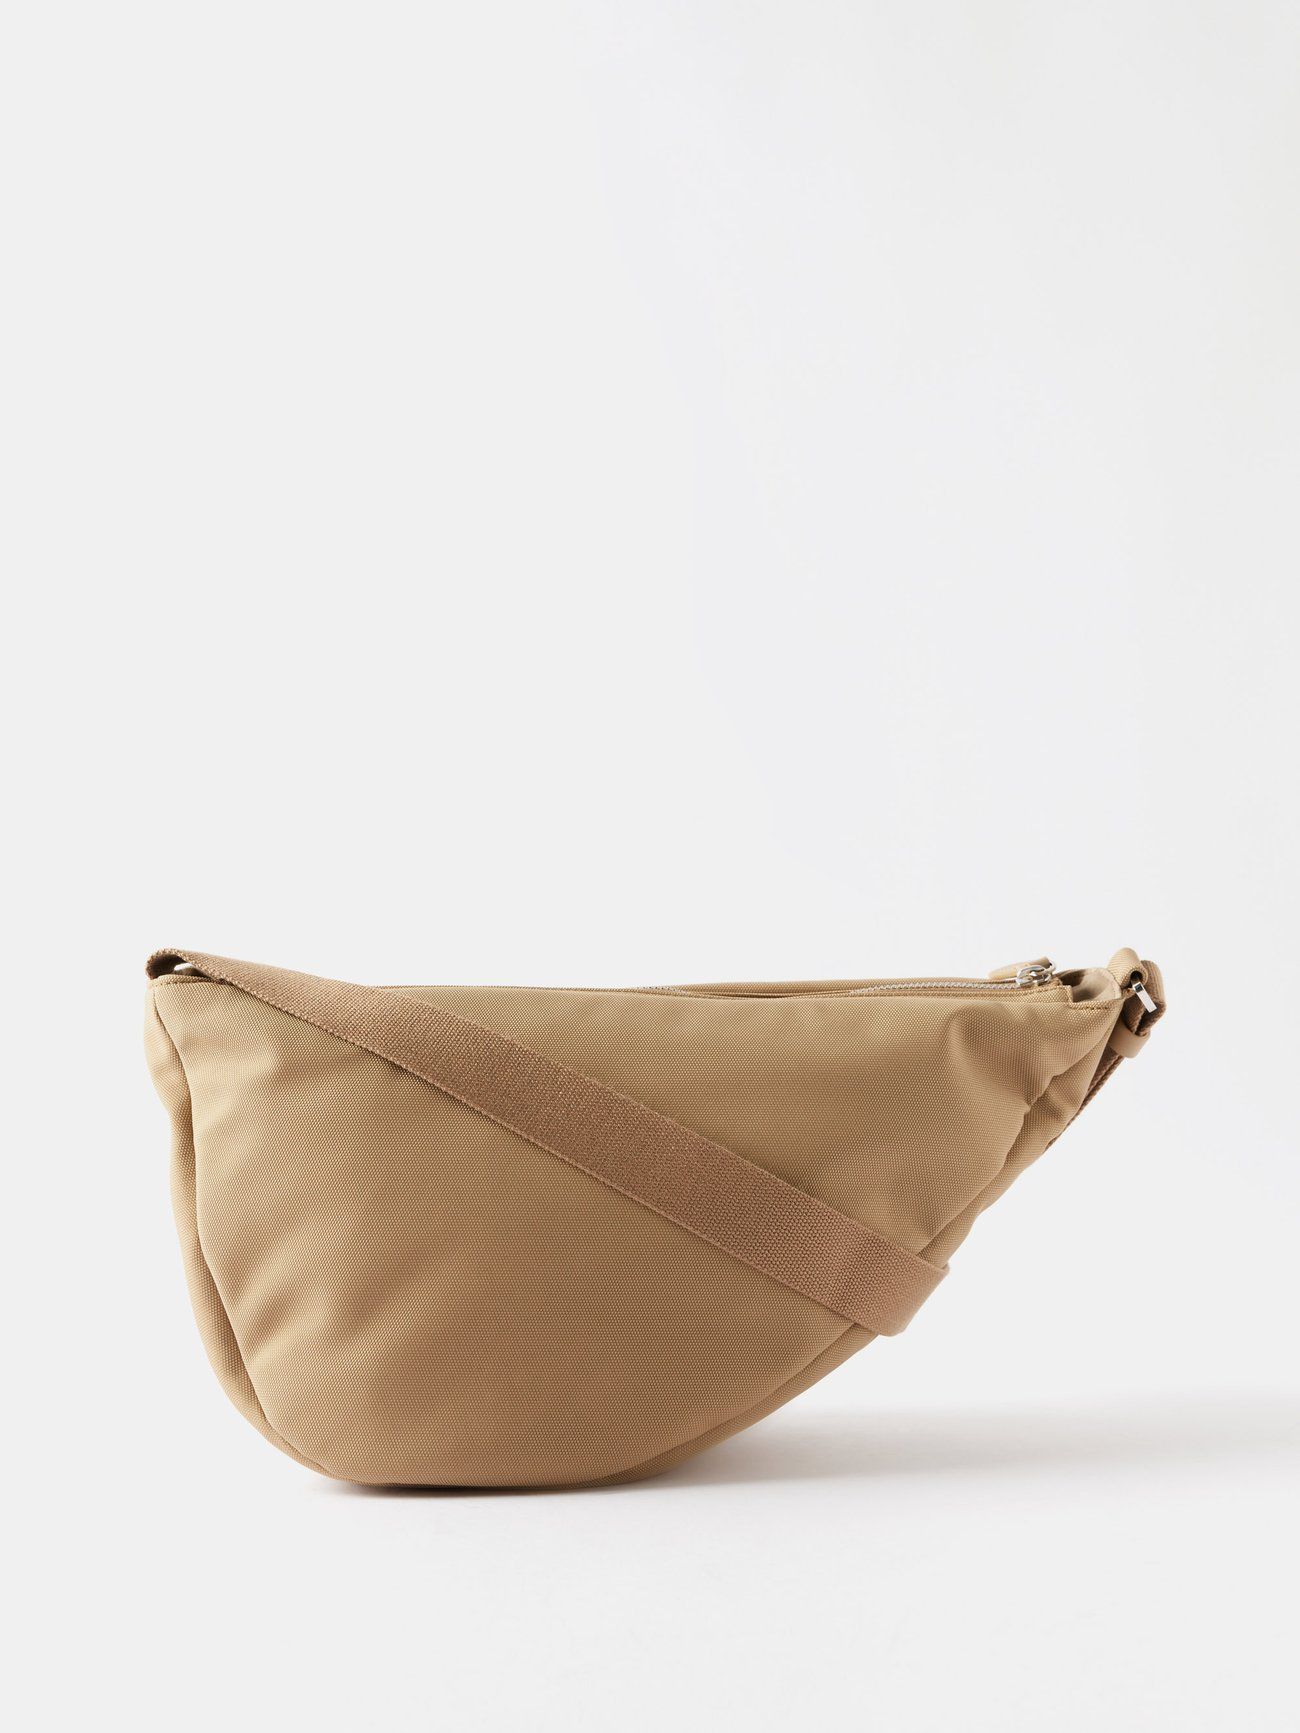 Is The Row's Slouchy Banana Bag the Next It Bag? | Who What Wear